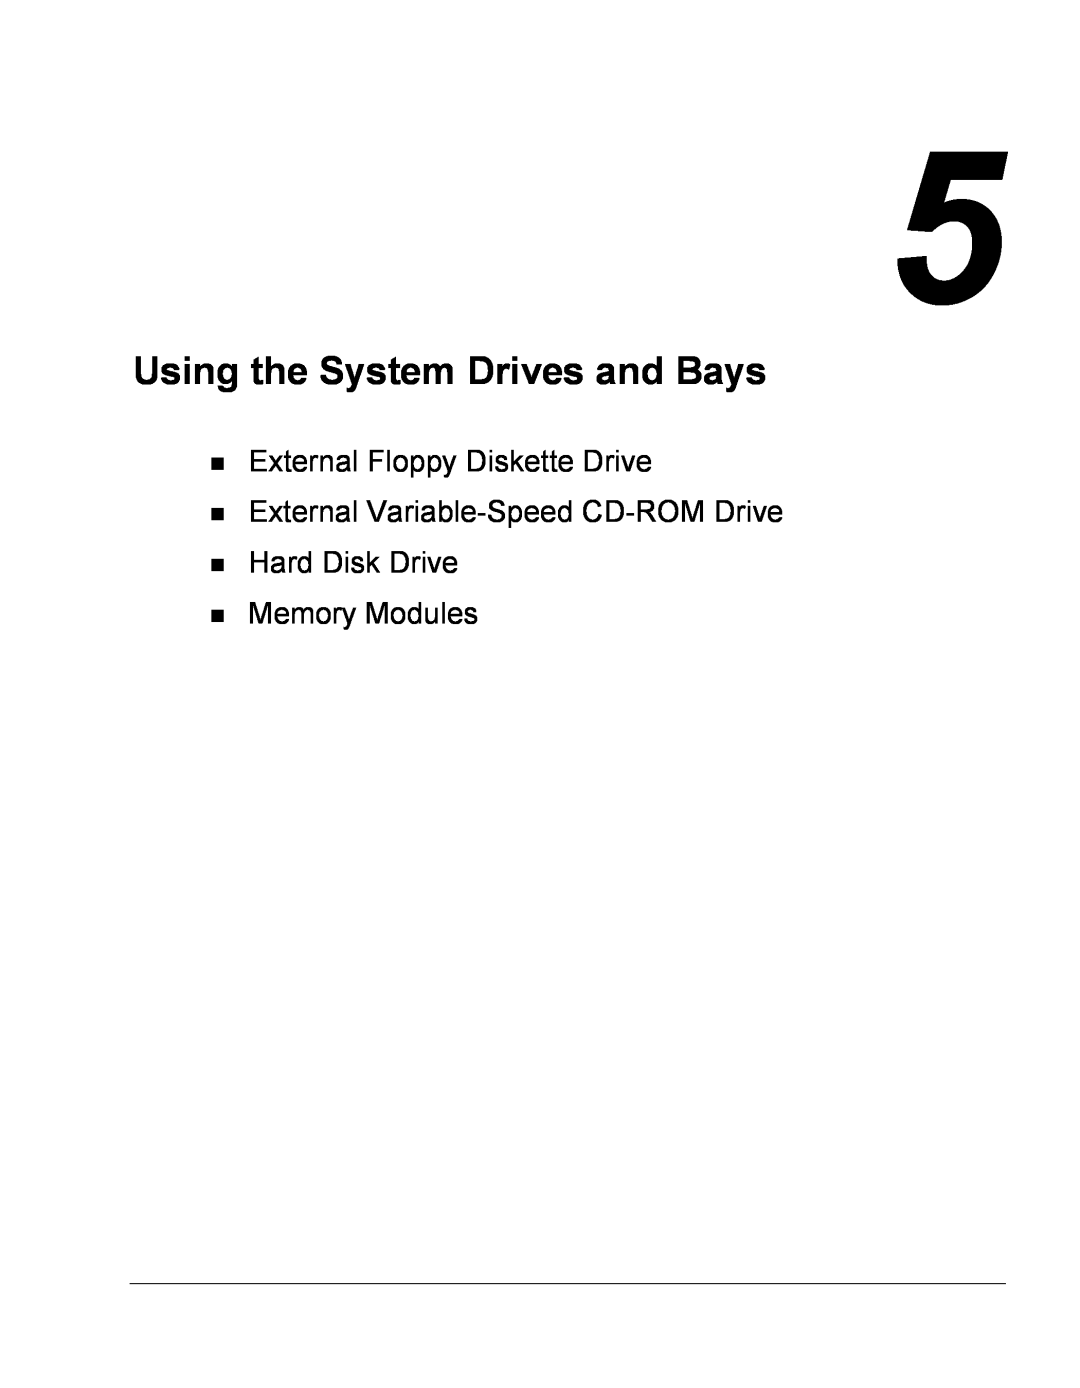 NEC Versa Series Using the System Drives and Bays, External Floppy Diskette Drive External Variable-Speed CD-ROM Drive 